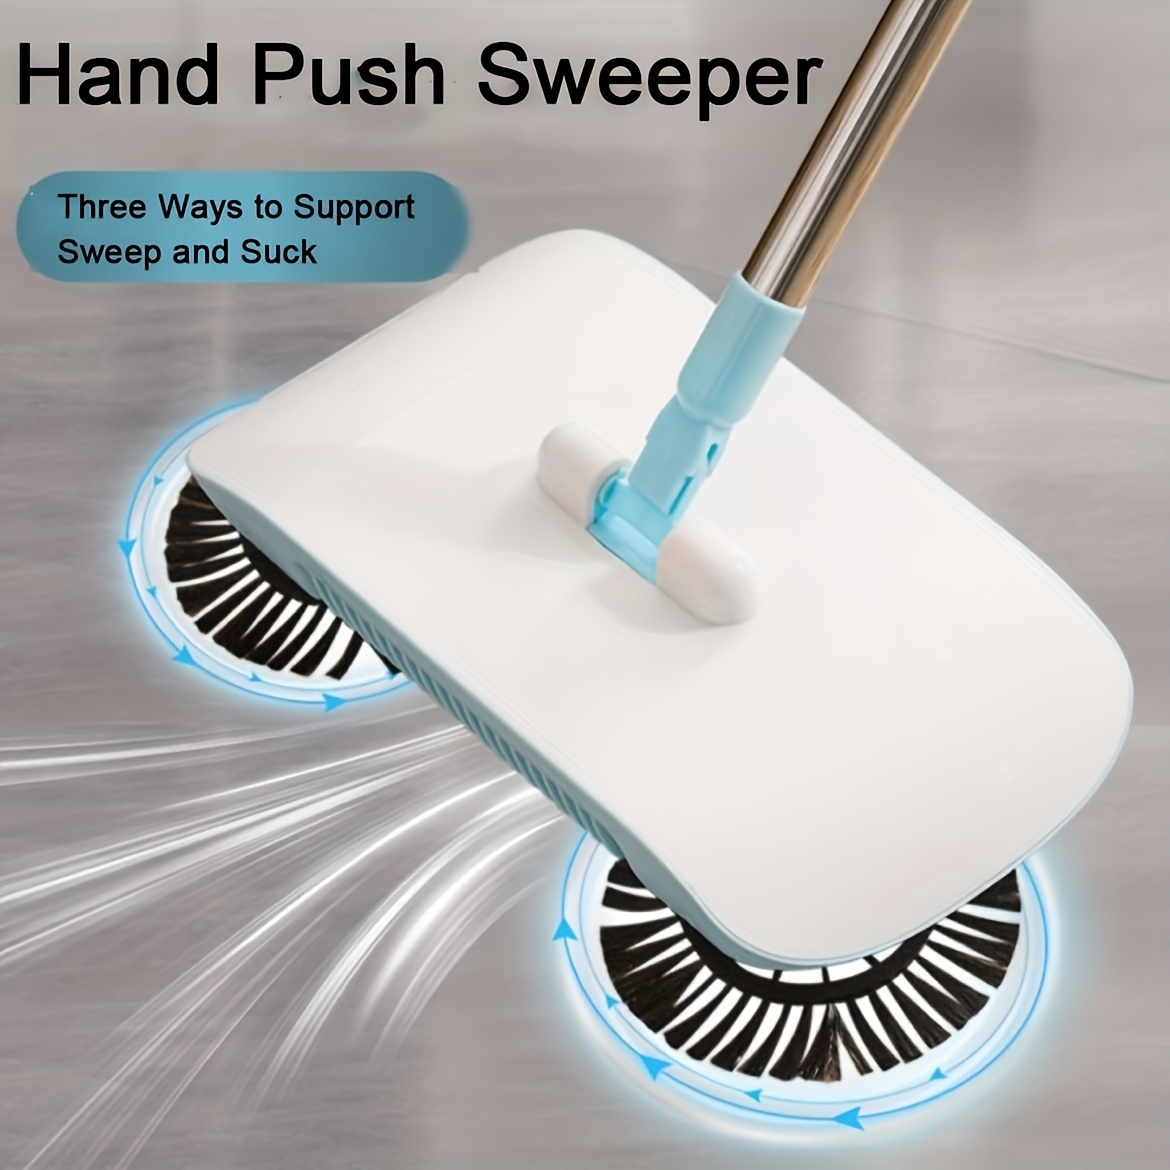 

Automatic Sweeping And Mopping Robot - The Perfect Gift For Family And Friends - Keep Your Floors Spotless!